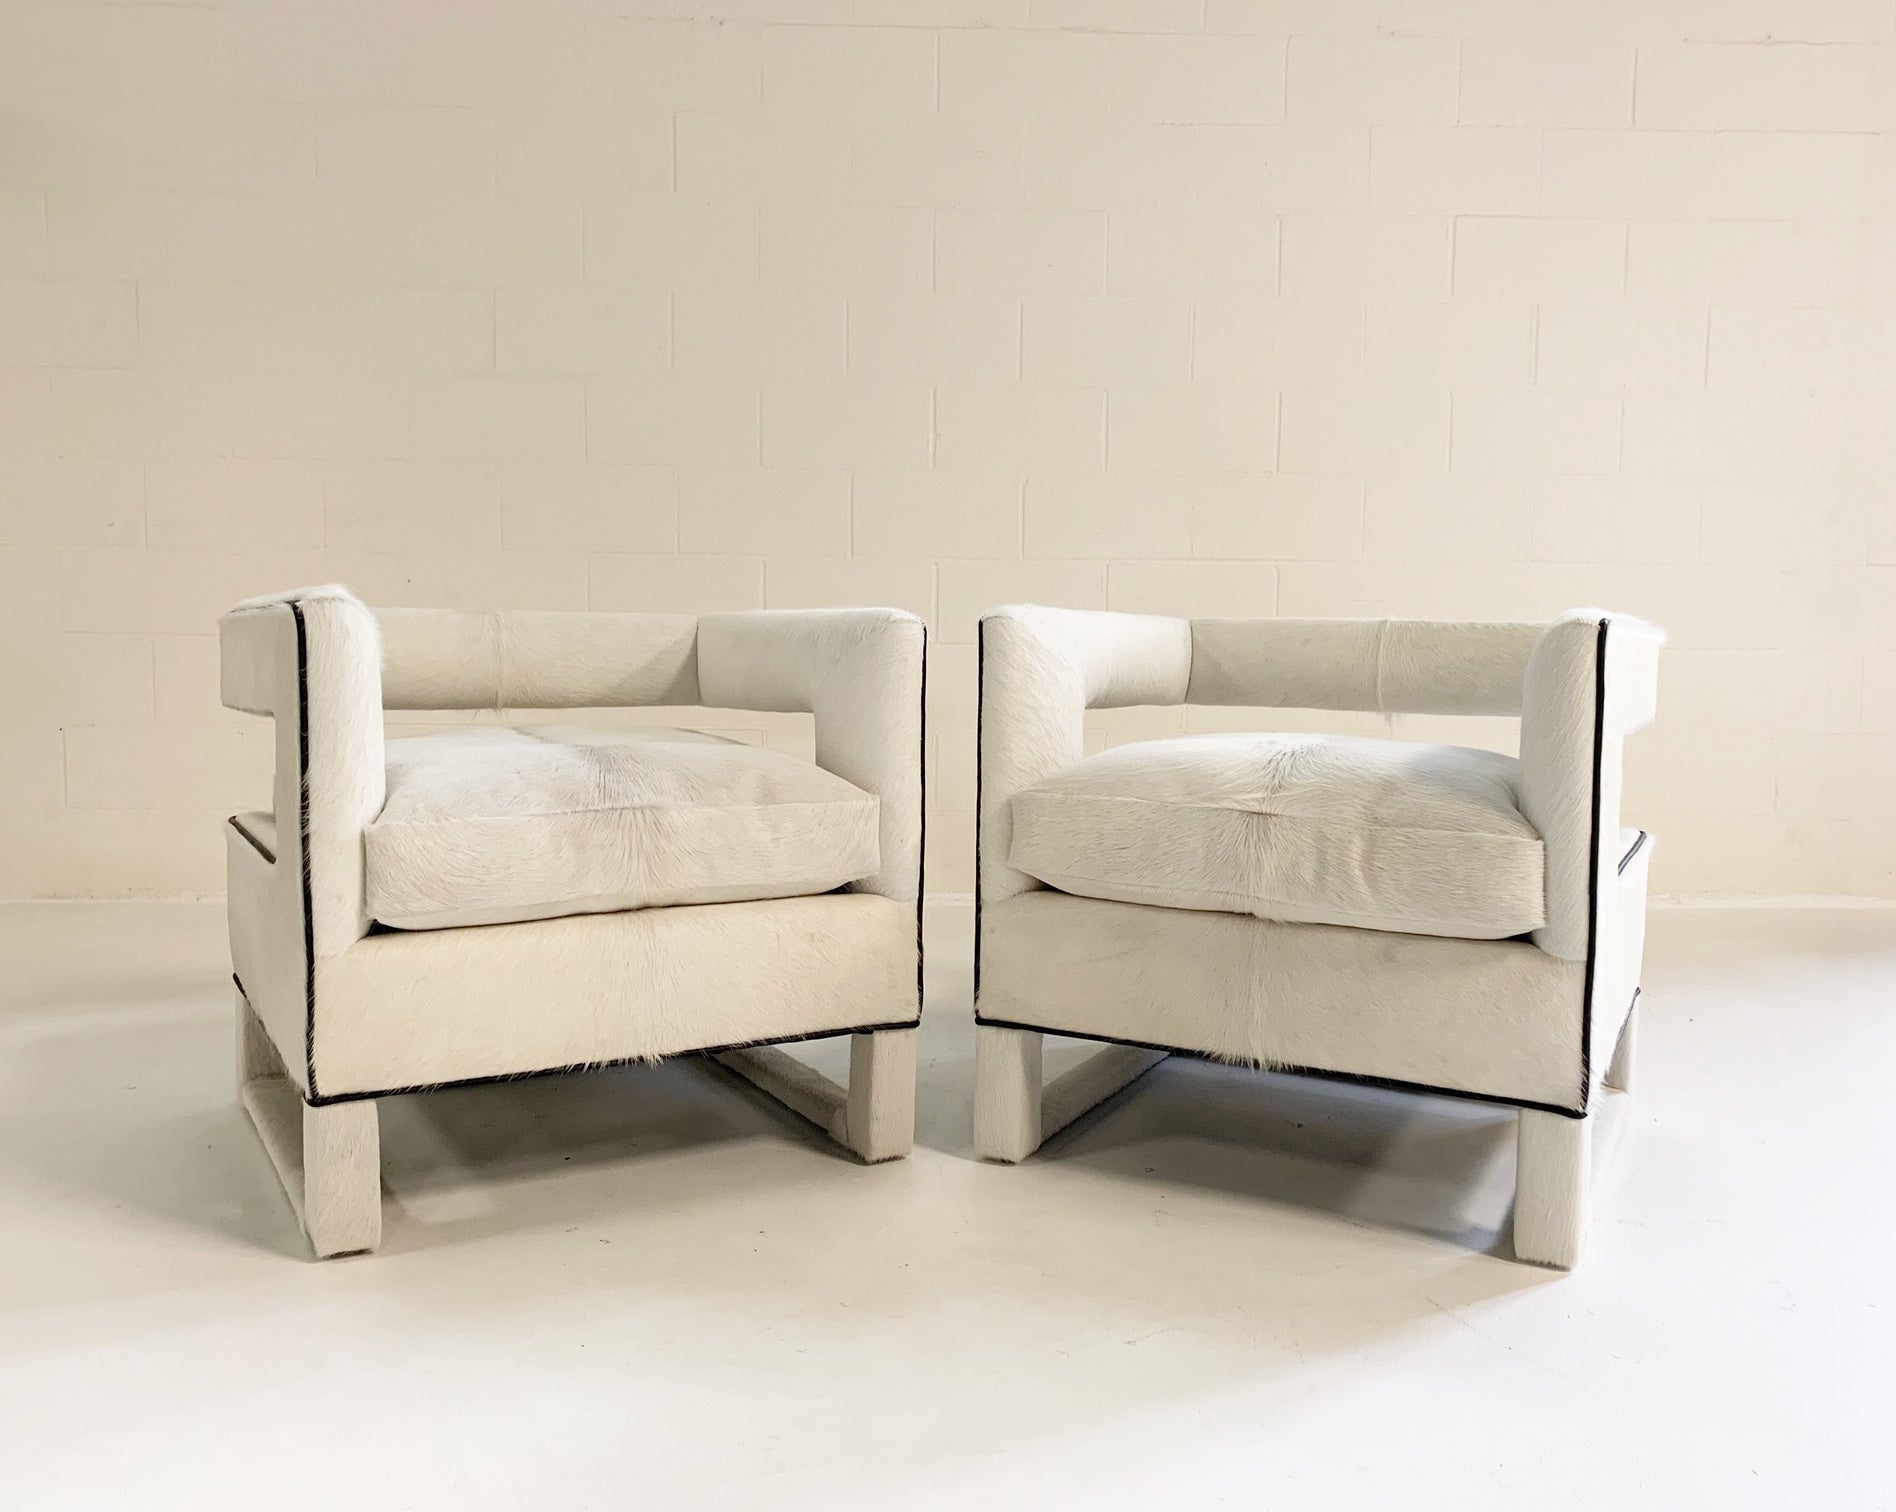 Cube Chairs in Brazilian Cowhide, pair - FORSYTH